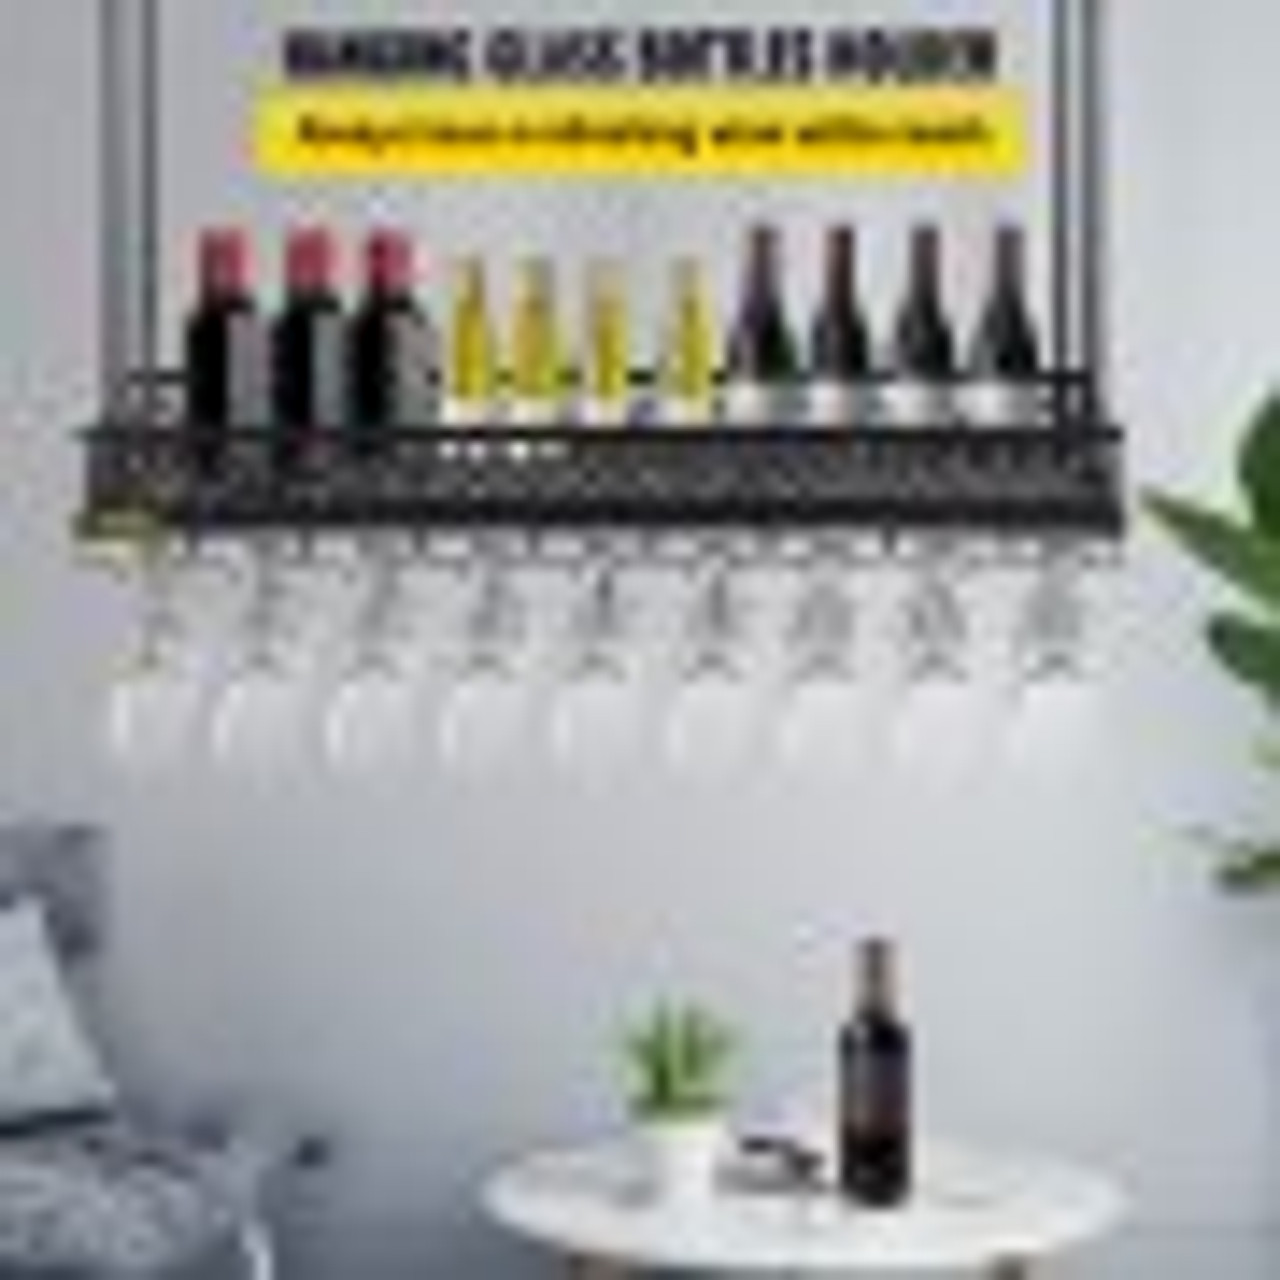 Ceiling Wine Glass Rack, 35.8 x 13 inch Hanging Wine Glass Rack, 18.9-35.8 inch Height Adjustable Hanging Wine Rack Cabinet, Black Wall-Mounted Wine Glass Rack Perfect for Bar Cafe Kitchen